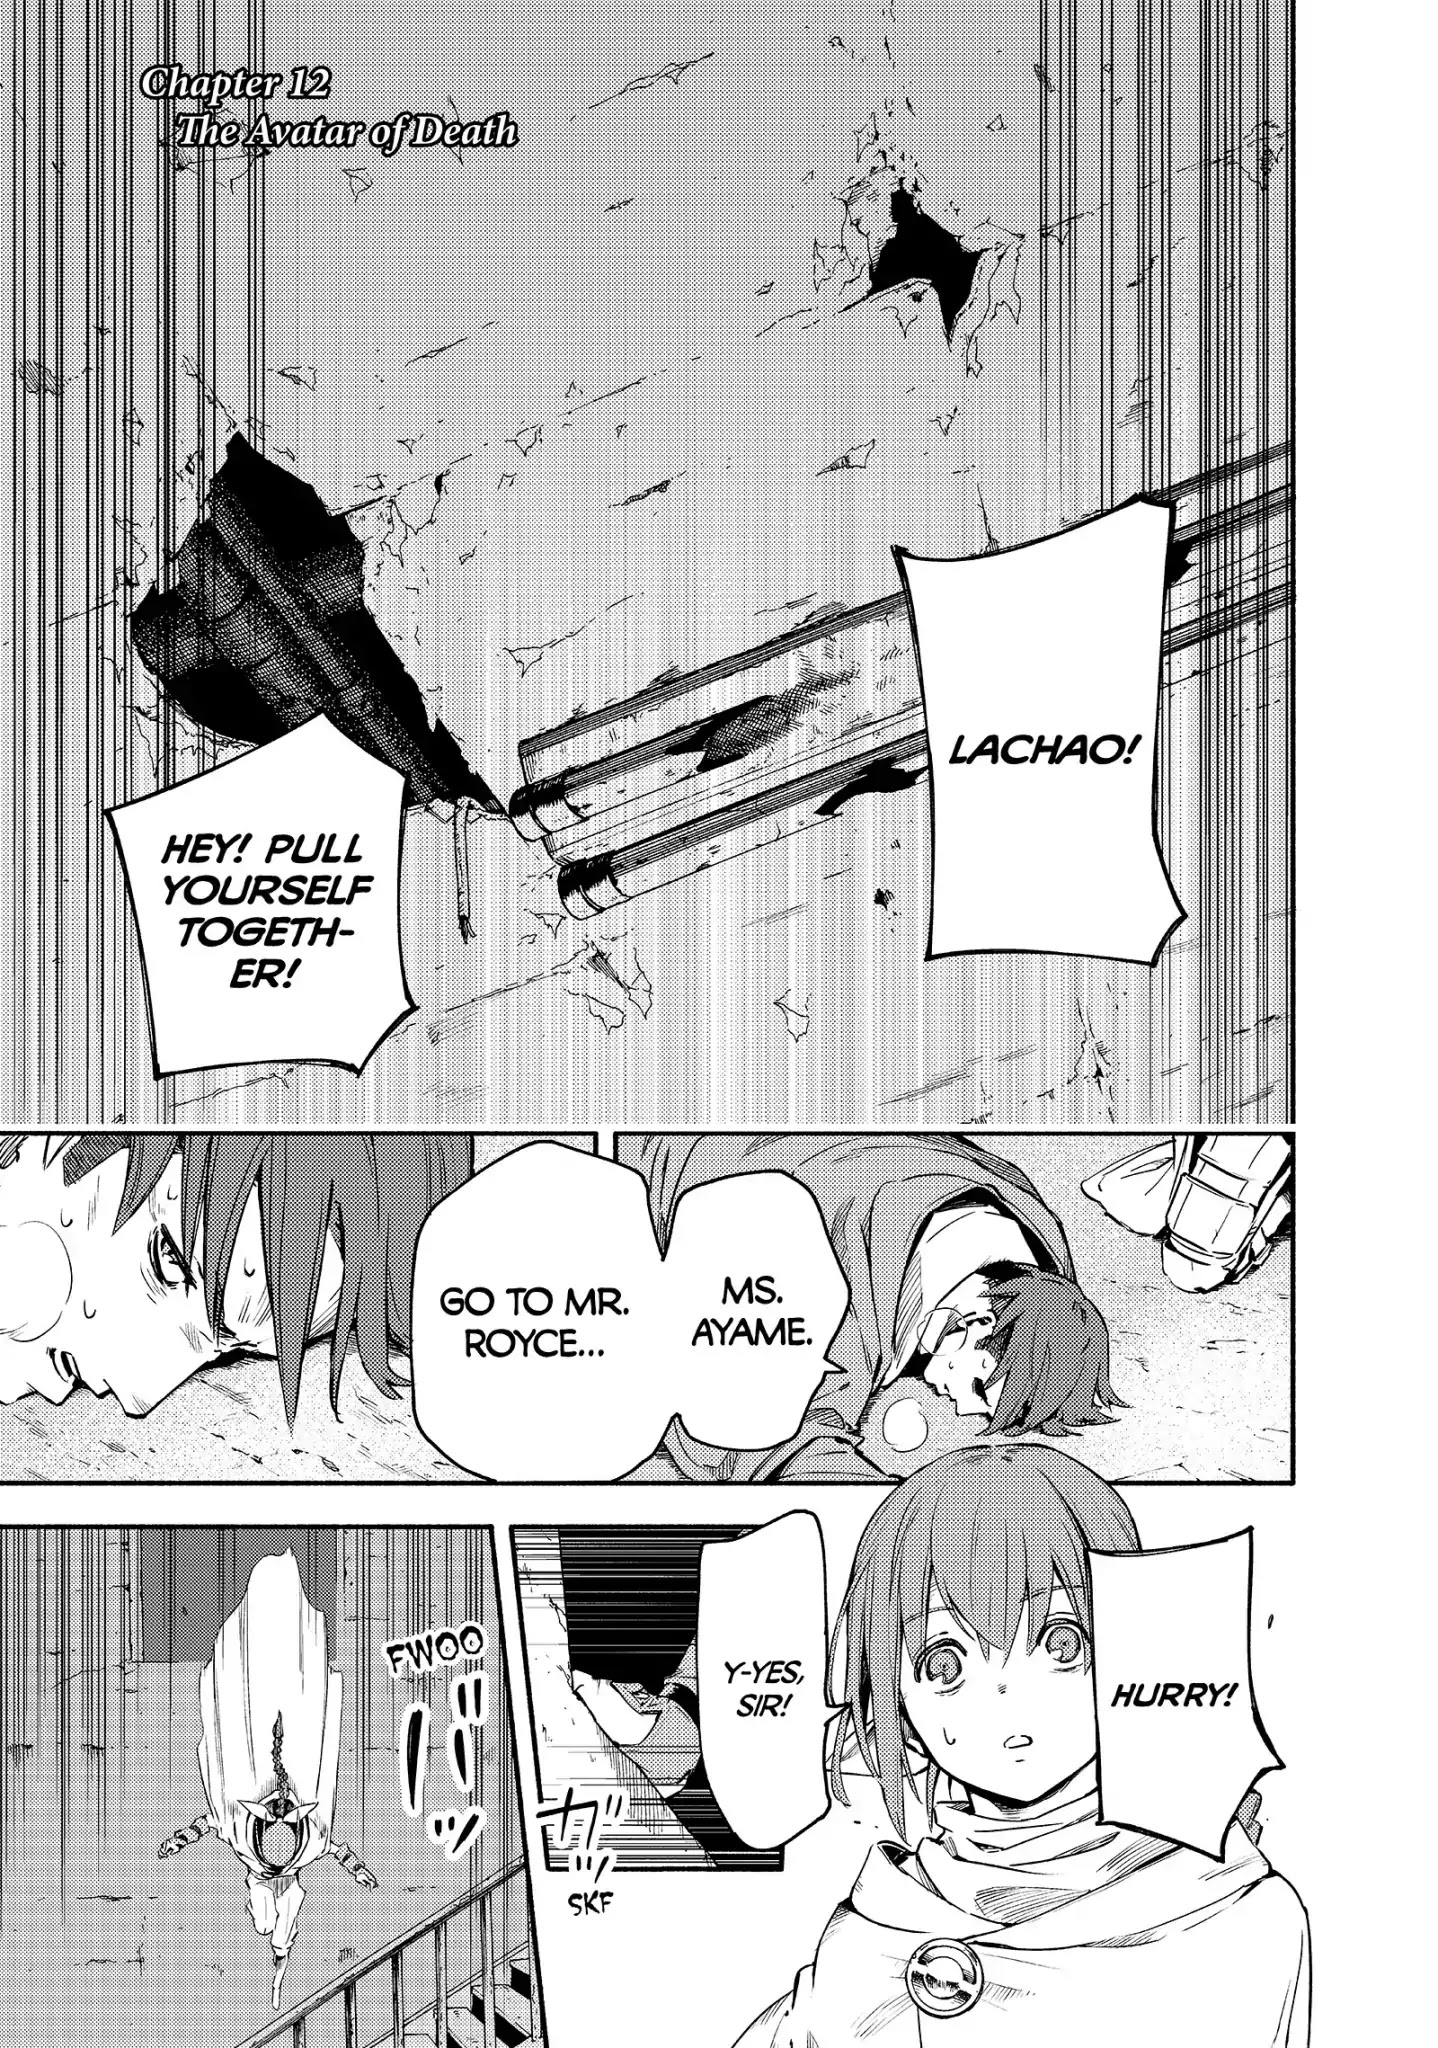 Ayanashi Chapter 12: The Avatar of Death